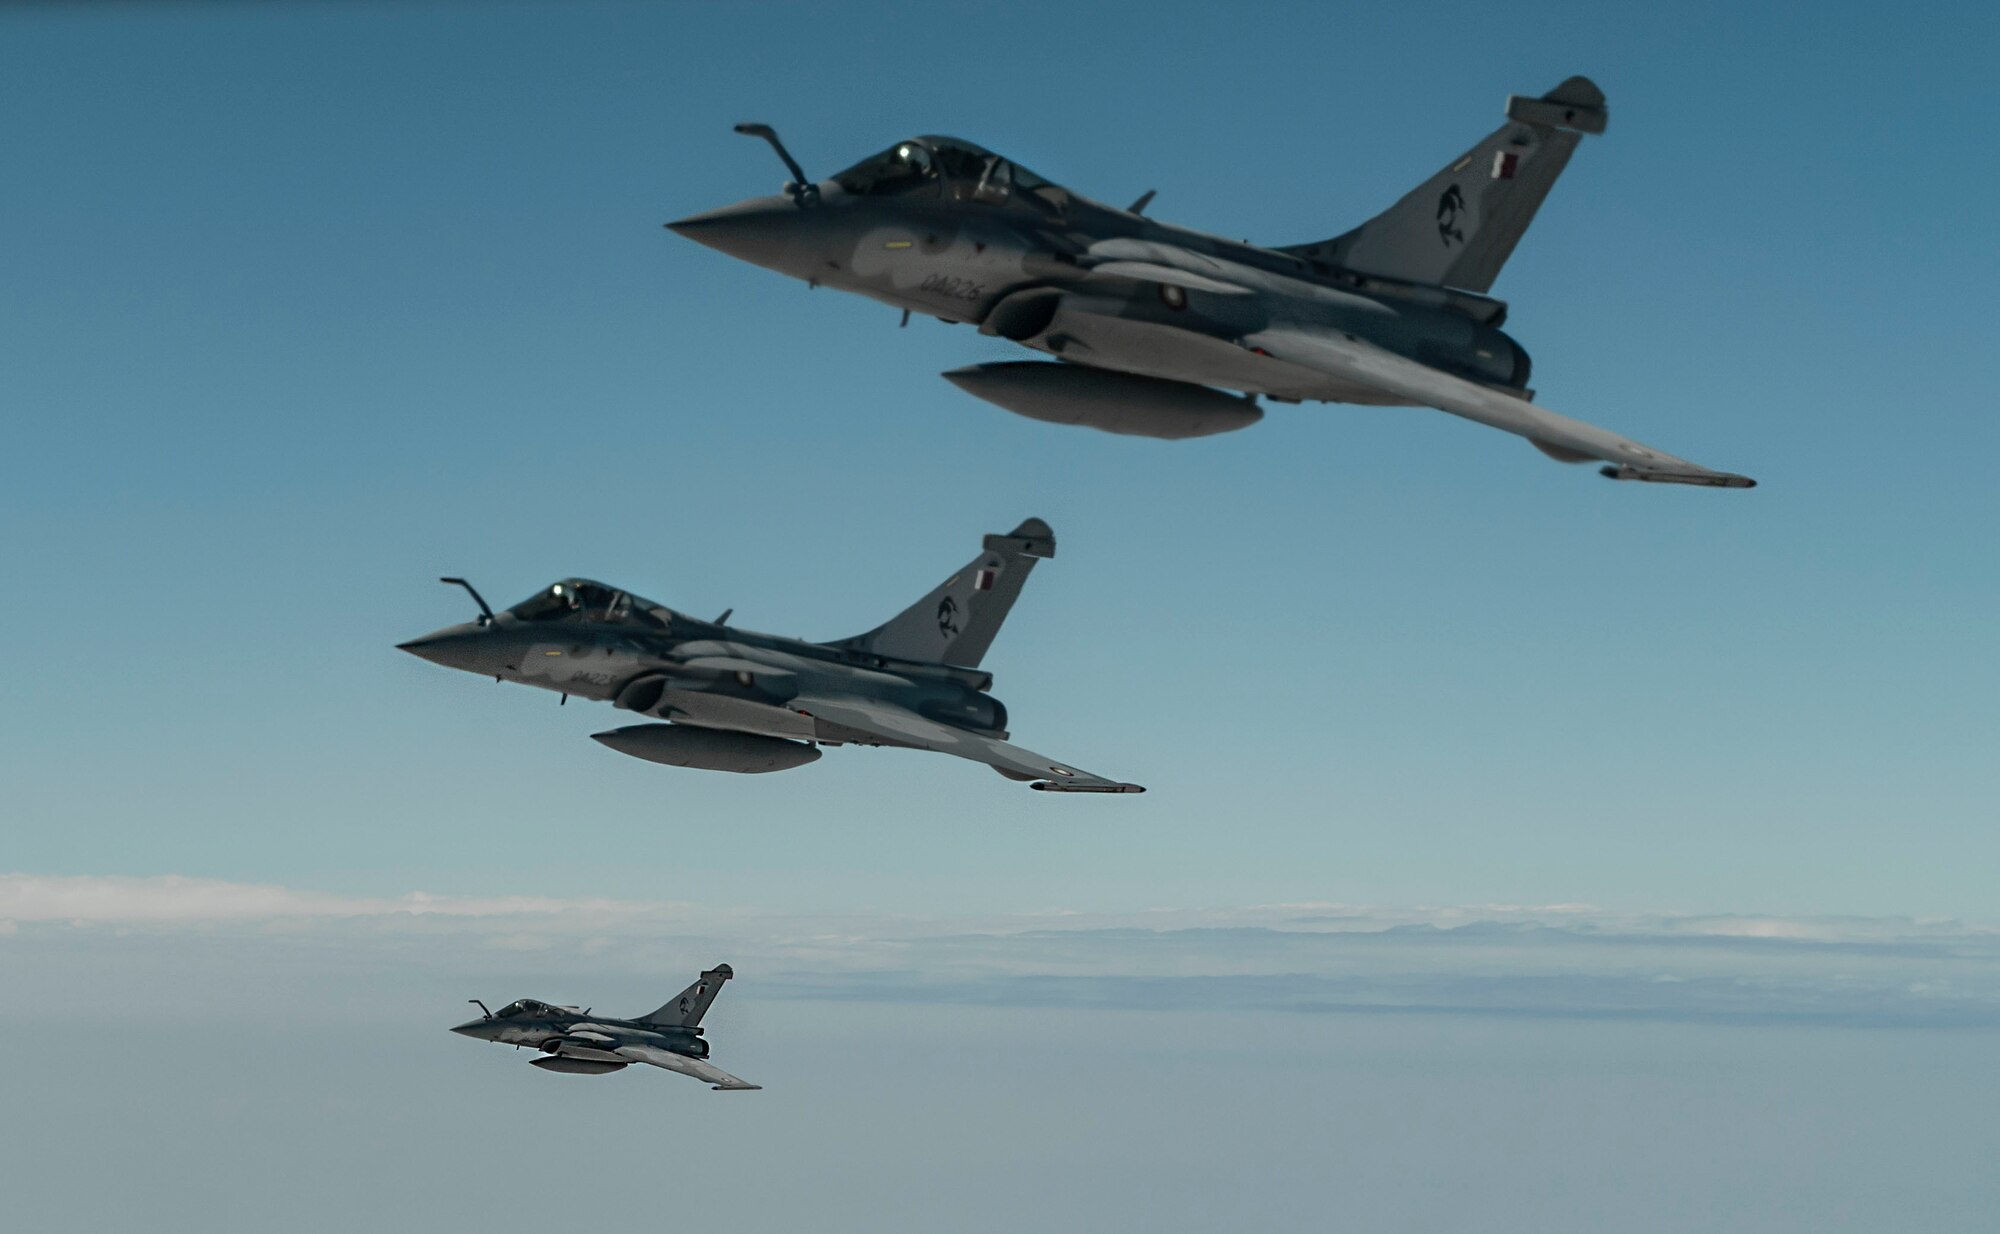 Rafales flying and being refueled